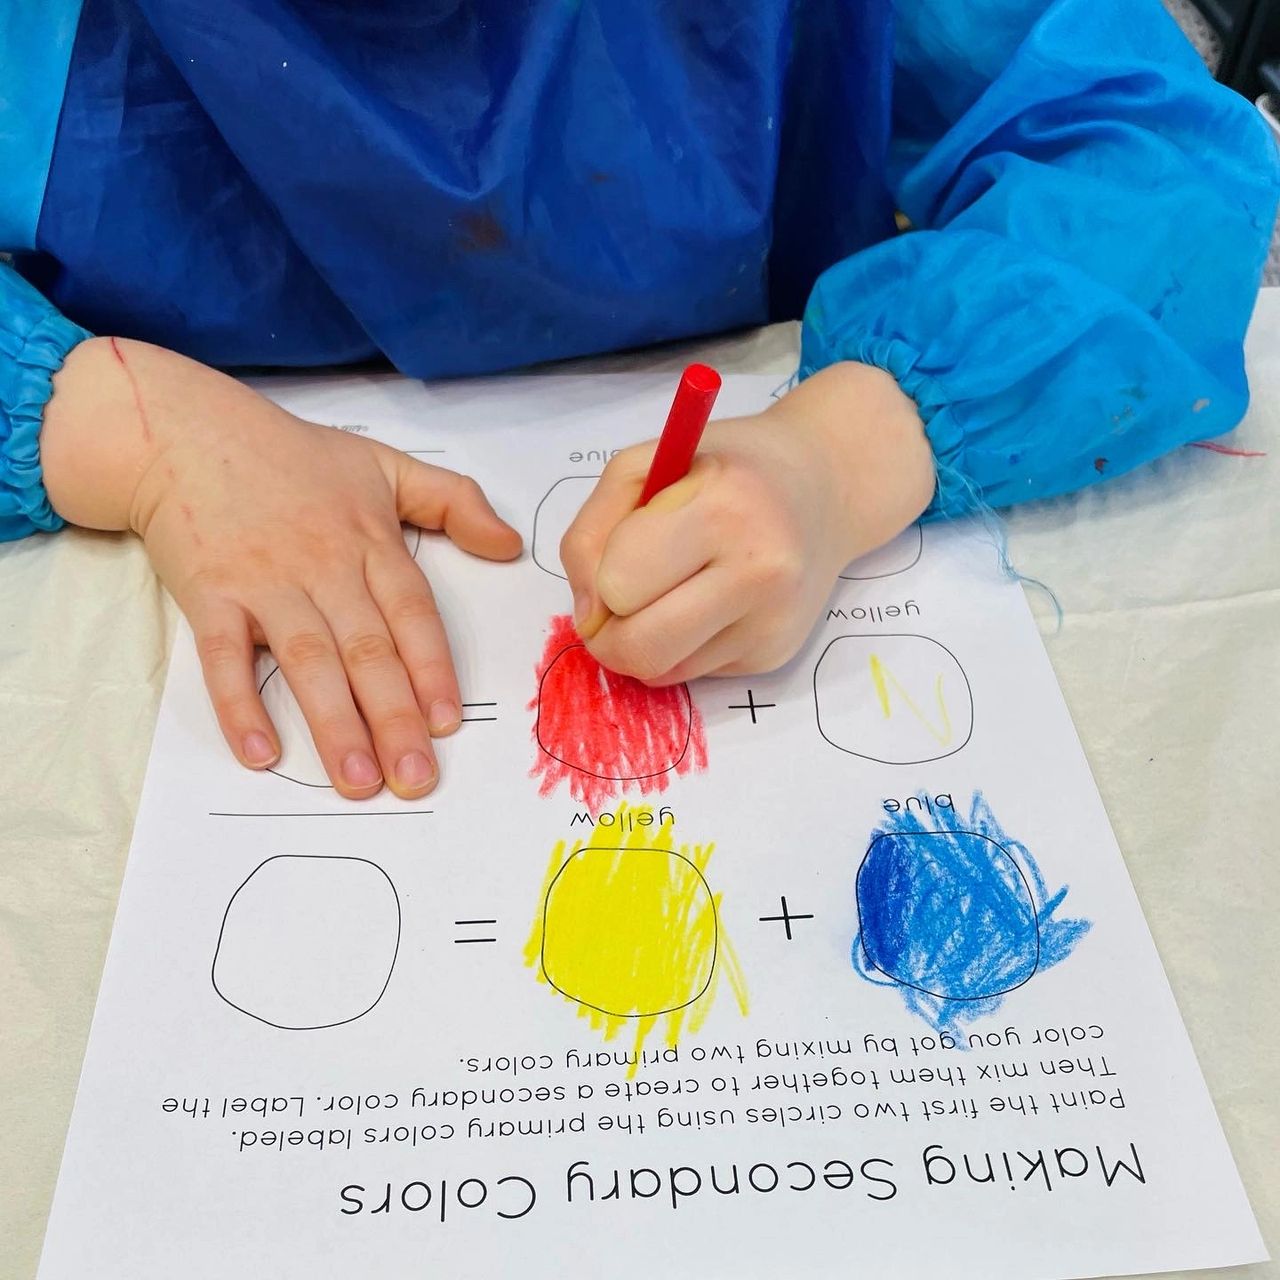 Kids Color Theory – Mixing Teaching Book - Nature of Art®